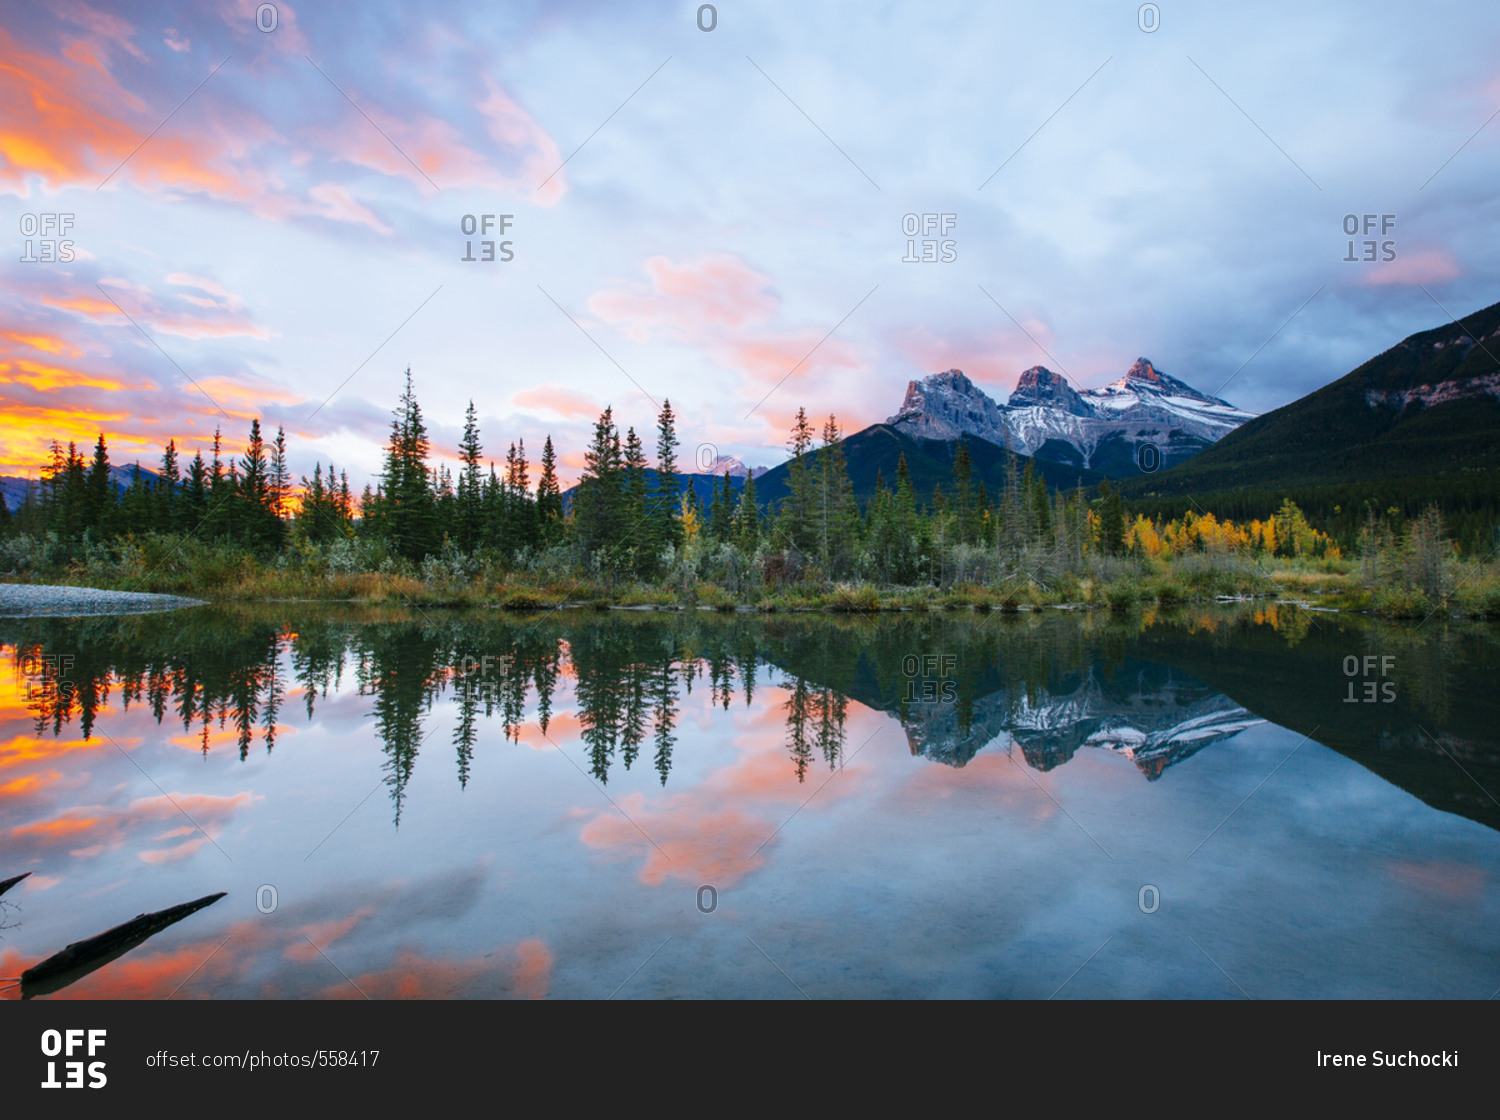 Mountain reflections in mountain lake at sunrise